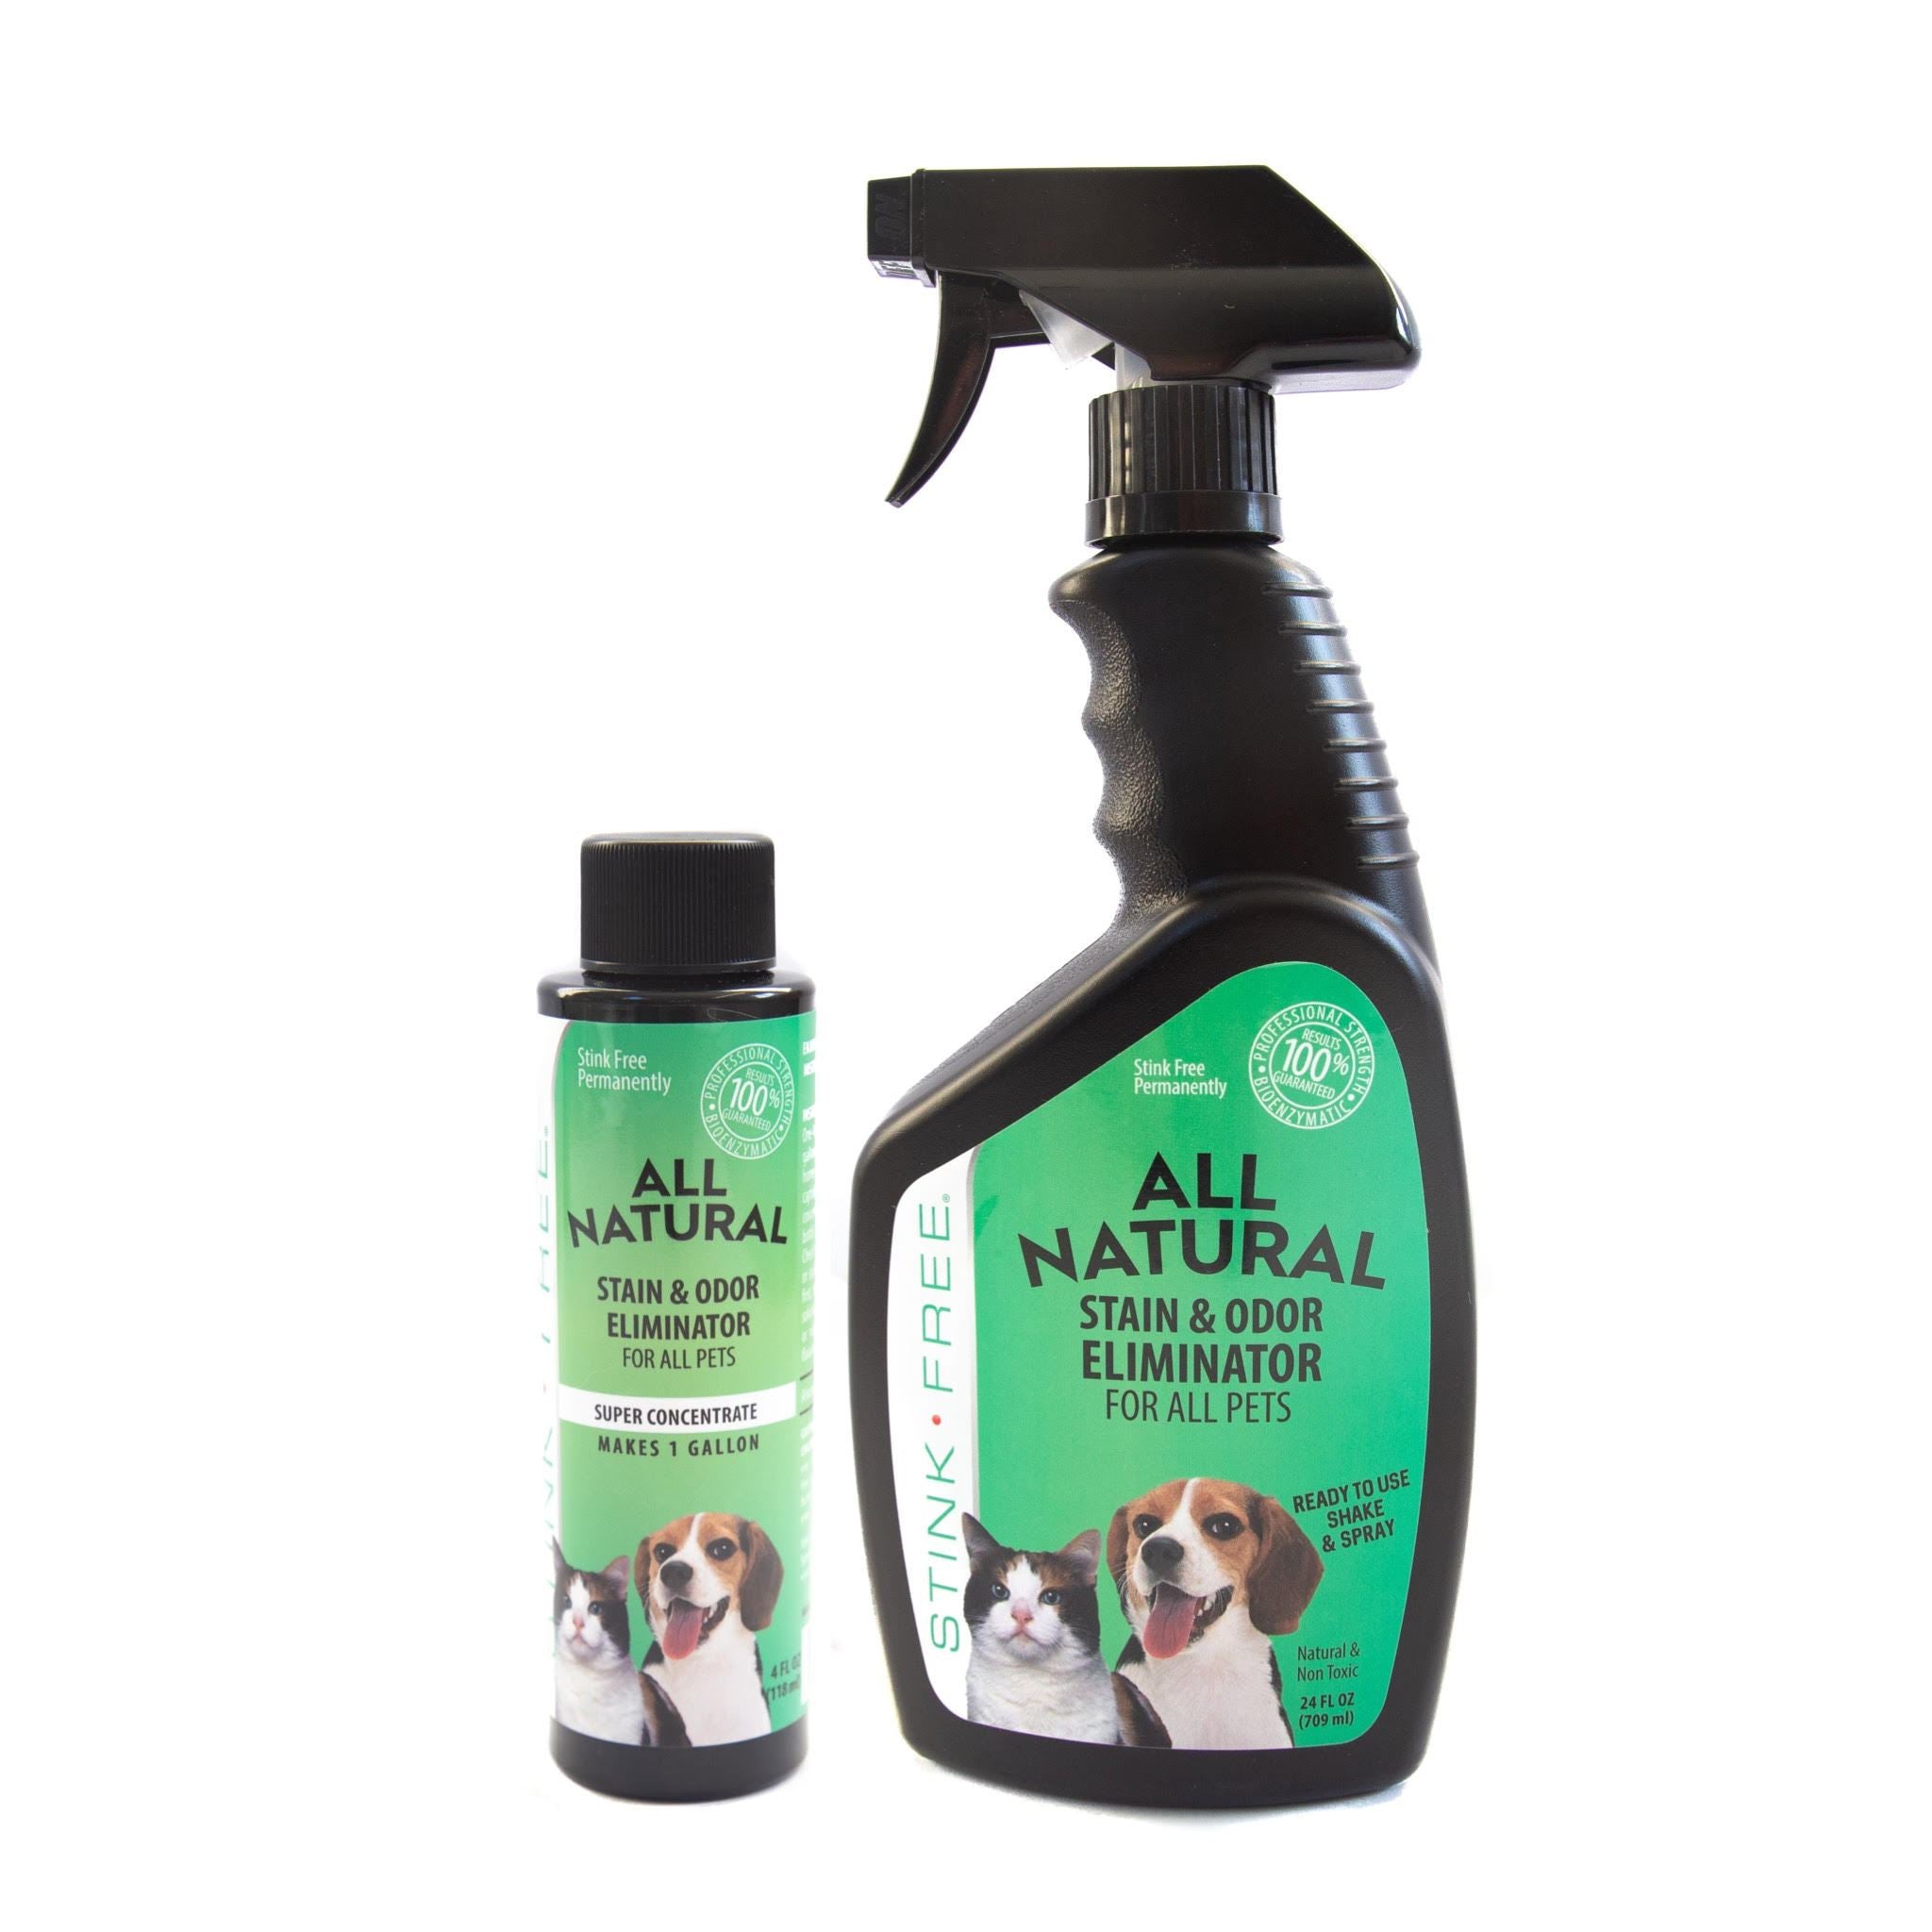 Stink Free All Natural Stain & Urine Odor Eliminator & Remover for Cat & Dog, Makes 1 Gallon of Solution, Microbial & Enzyme Based Pee Cleaner Destroyer for Carpets, Hardwoods, Tile & more!